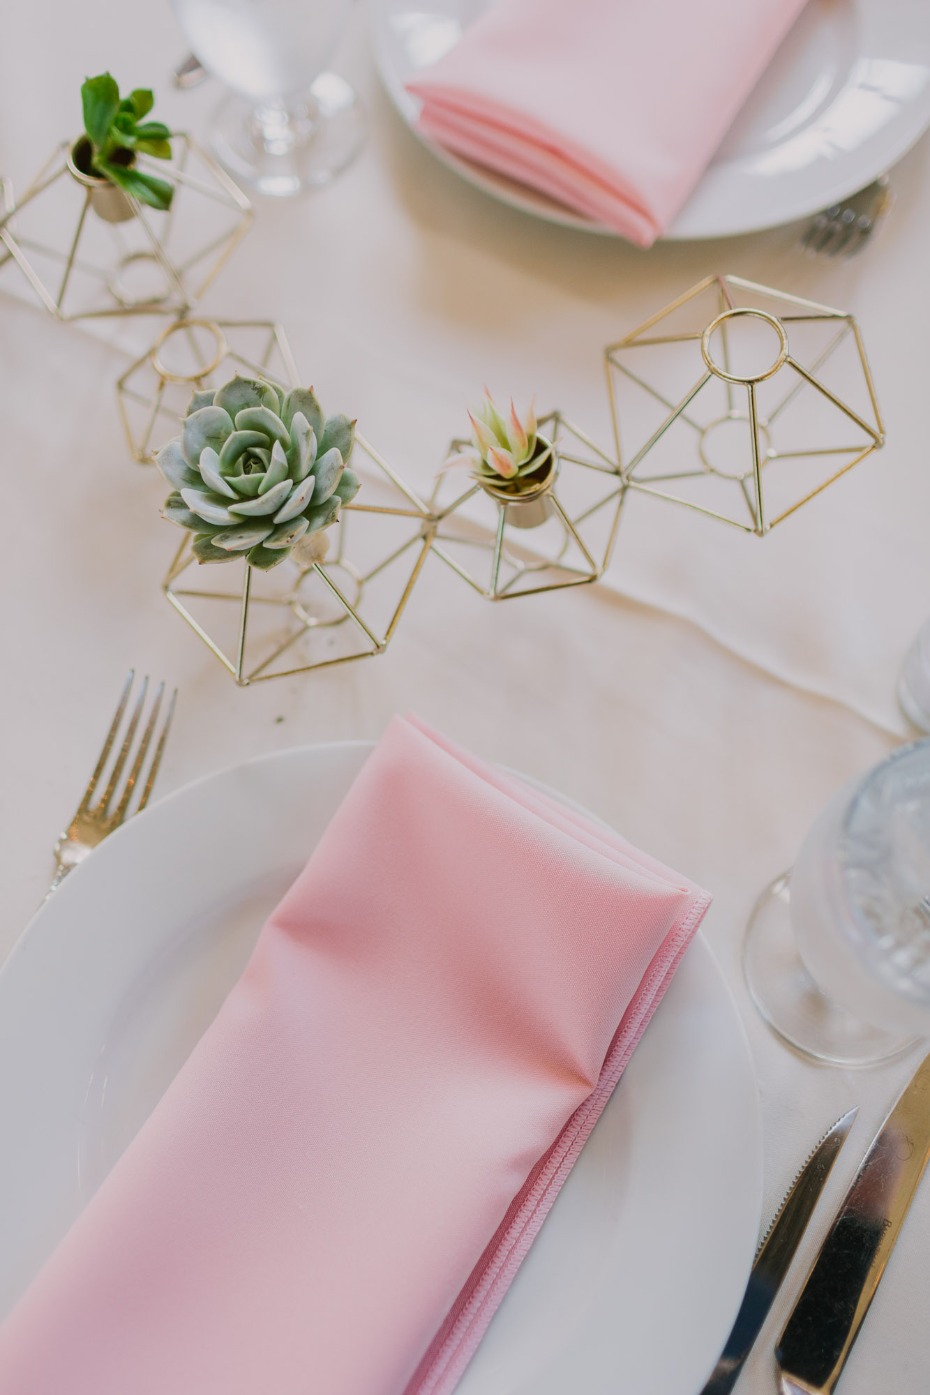 Table decor with succulents